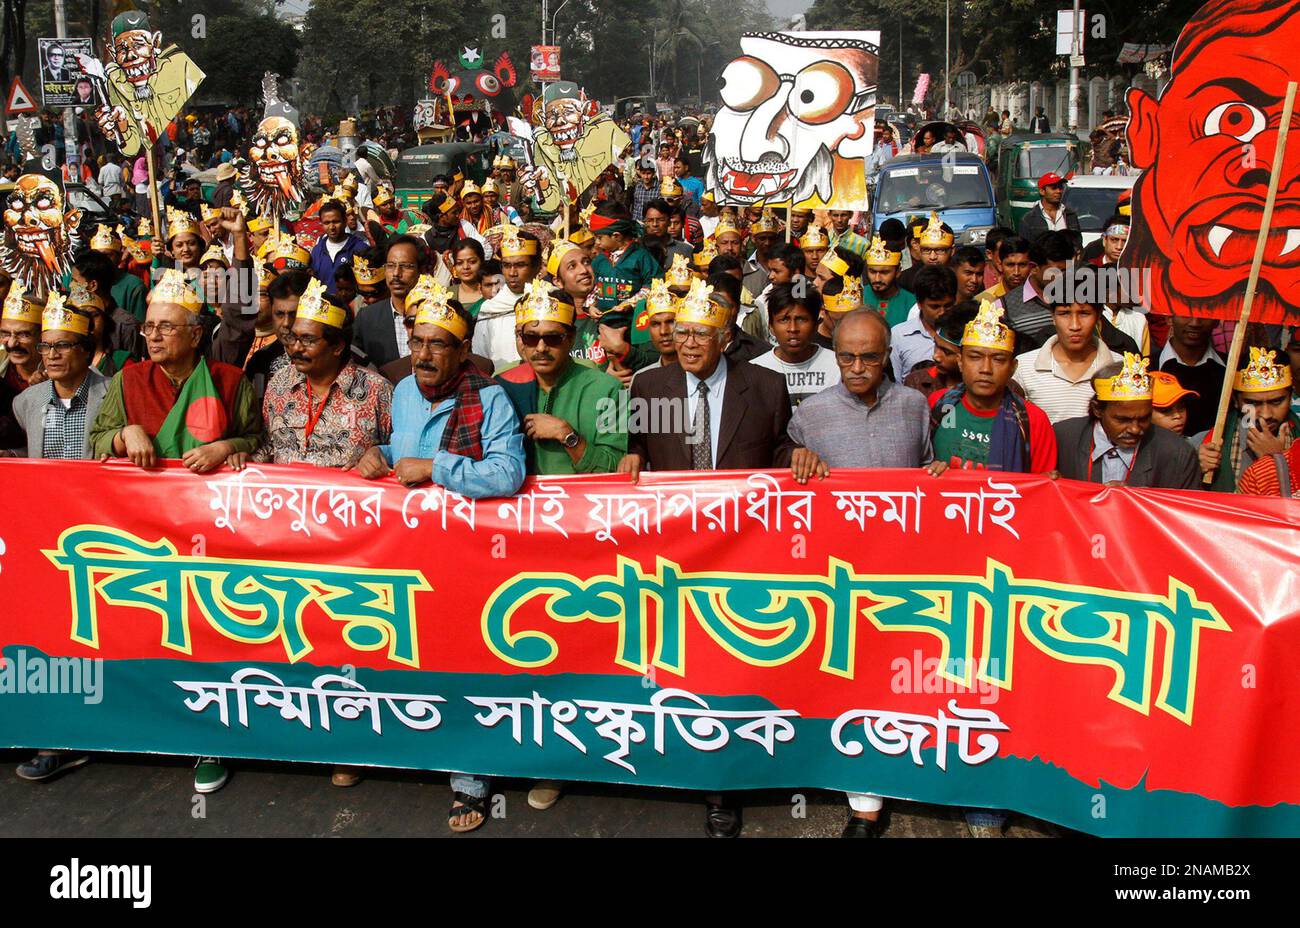 Bangladeshis carry a placard depicting war criminals during celebrations marking the 40th Victory Day anniversary in Dhaka, Bangladesh, Friday, Dec. 16, 2011. Victory Day, which commemorates the end of the Bangladesh liberation war against Pakistan, is celebrated each year on Dec. 16. Banner reads "No mercy for war criminals. Victory Day." (AP Photo/Pavel Rahman) Stock Photo